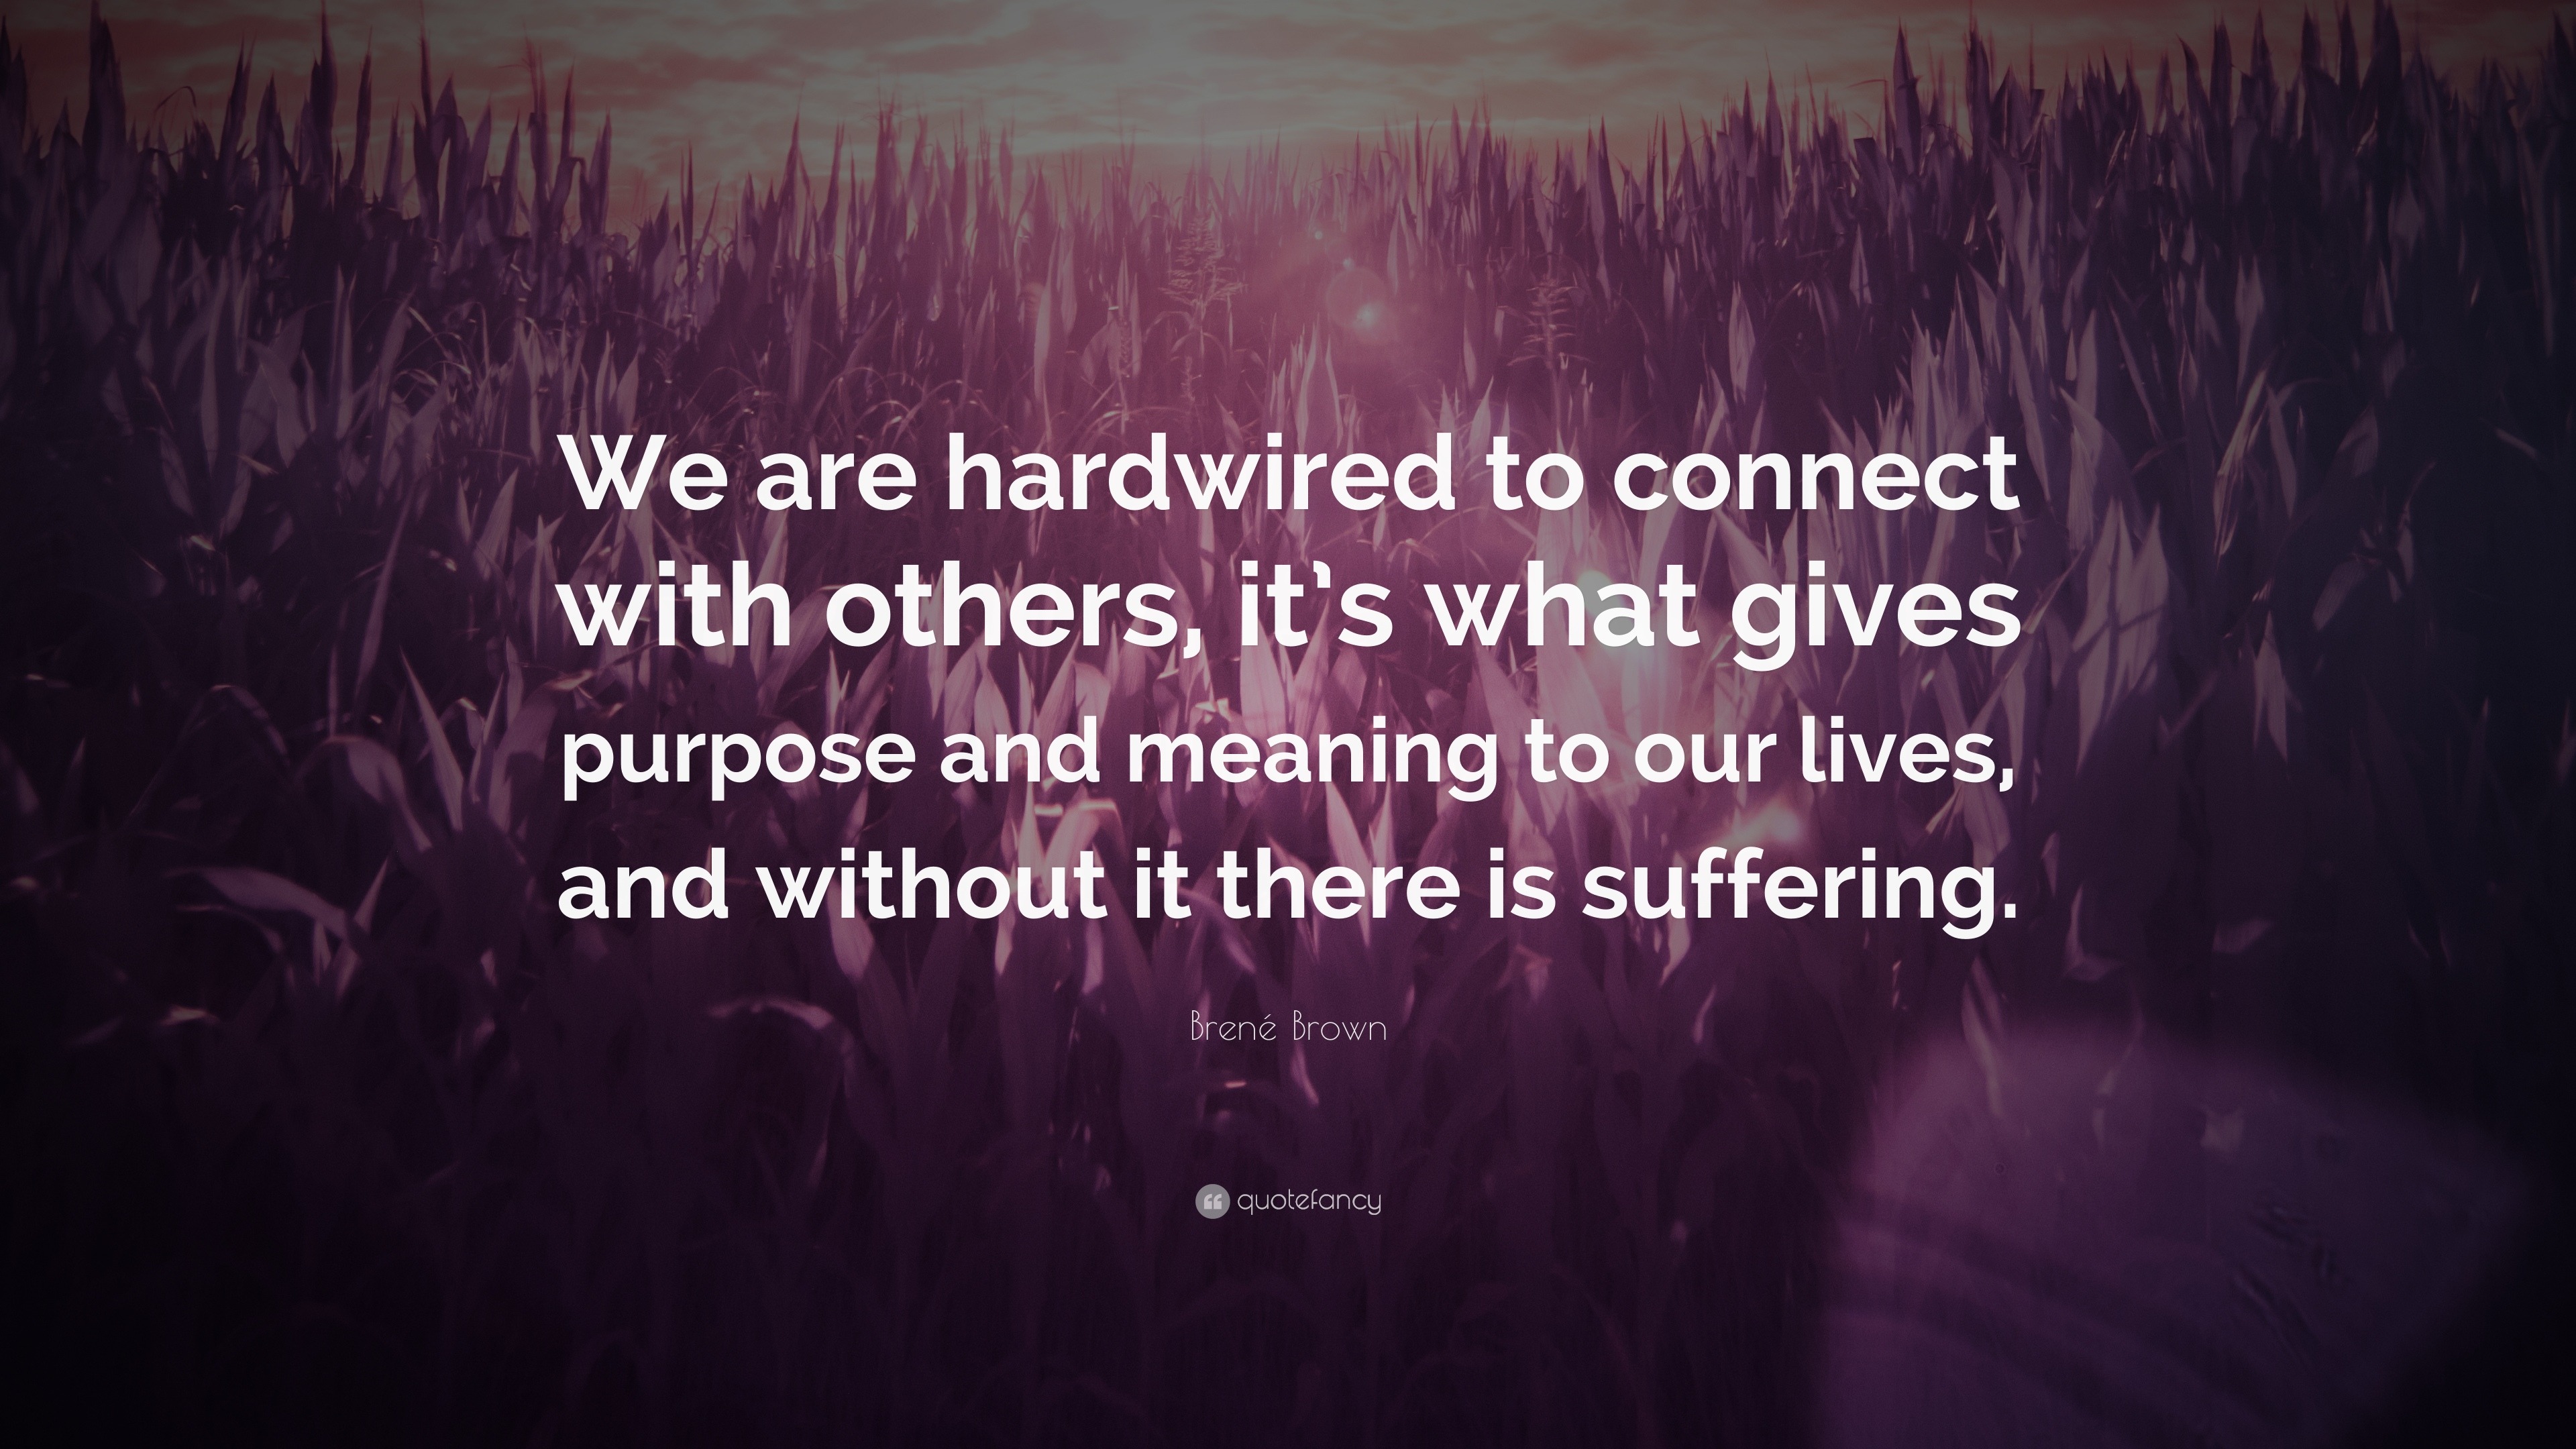 Brené Brown Quote “We are hardwired to connect with